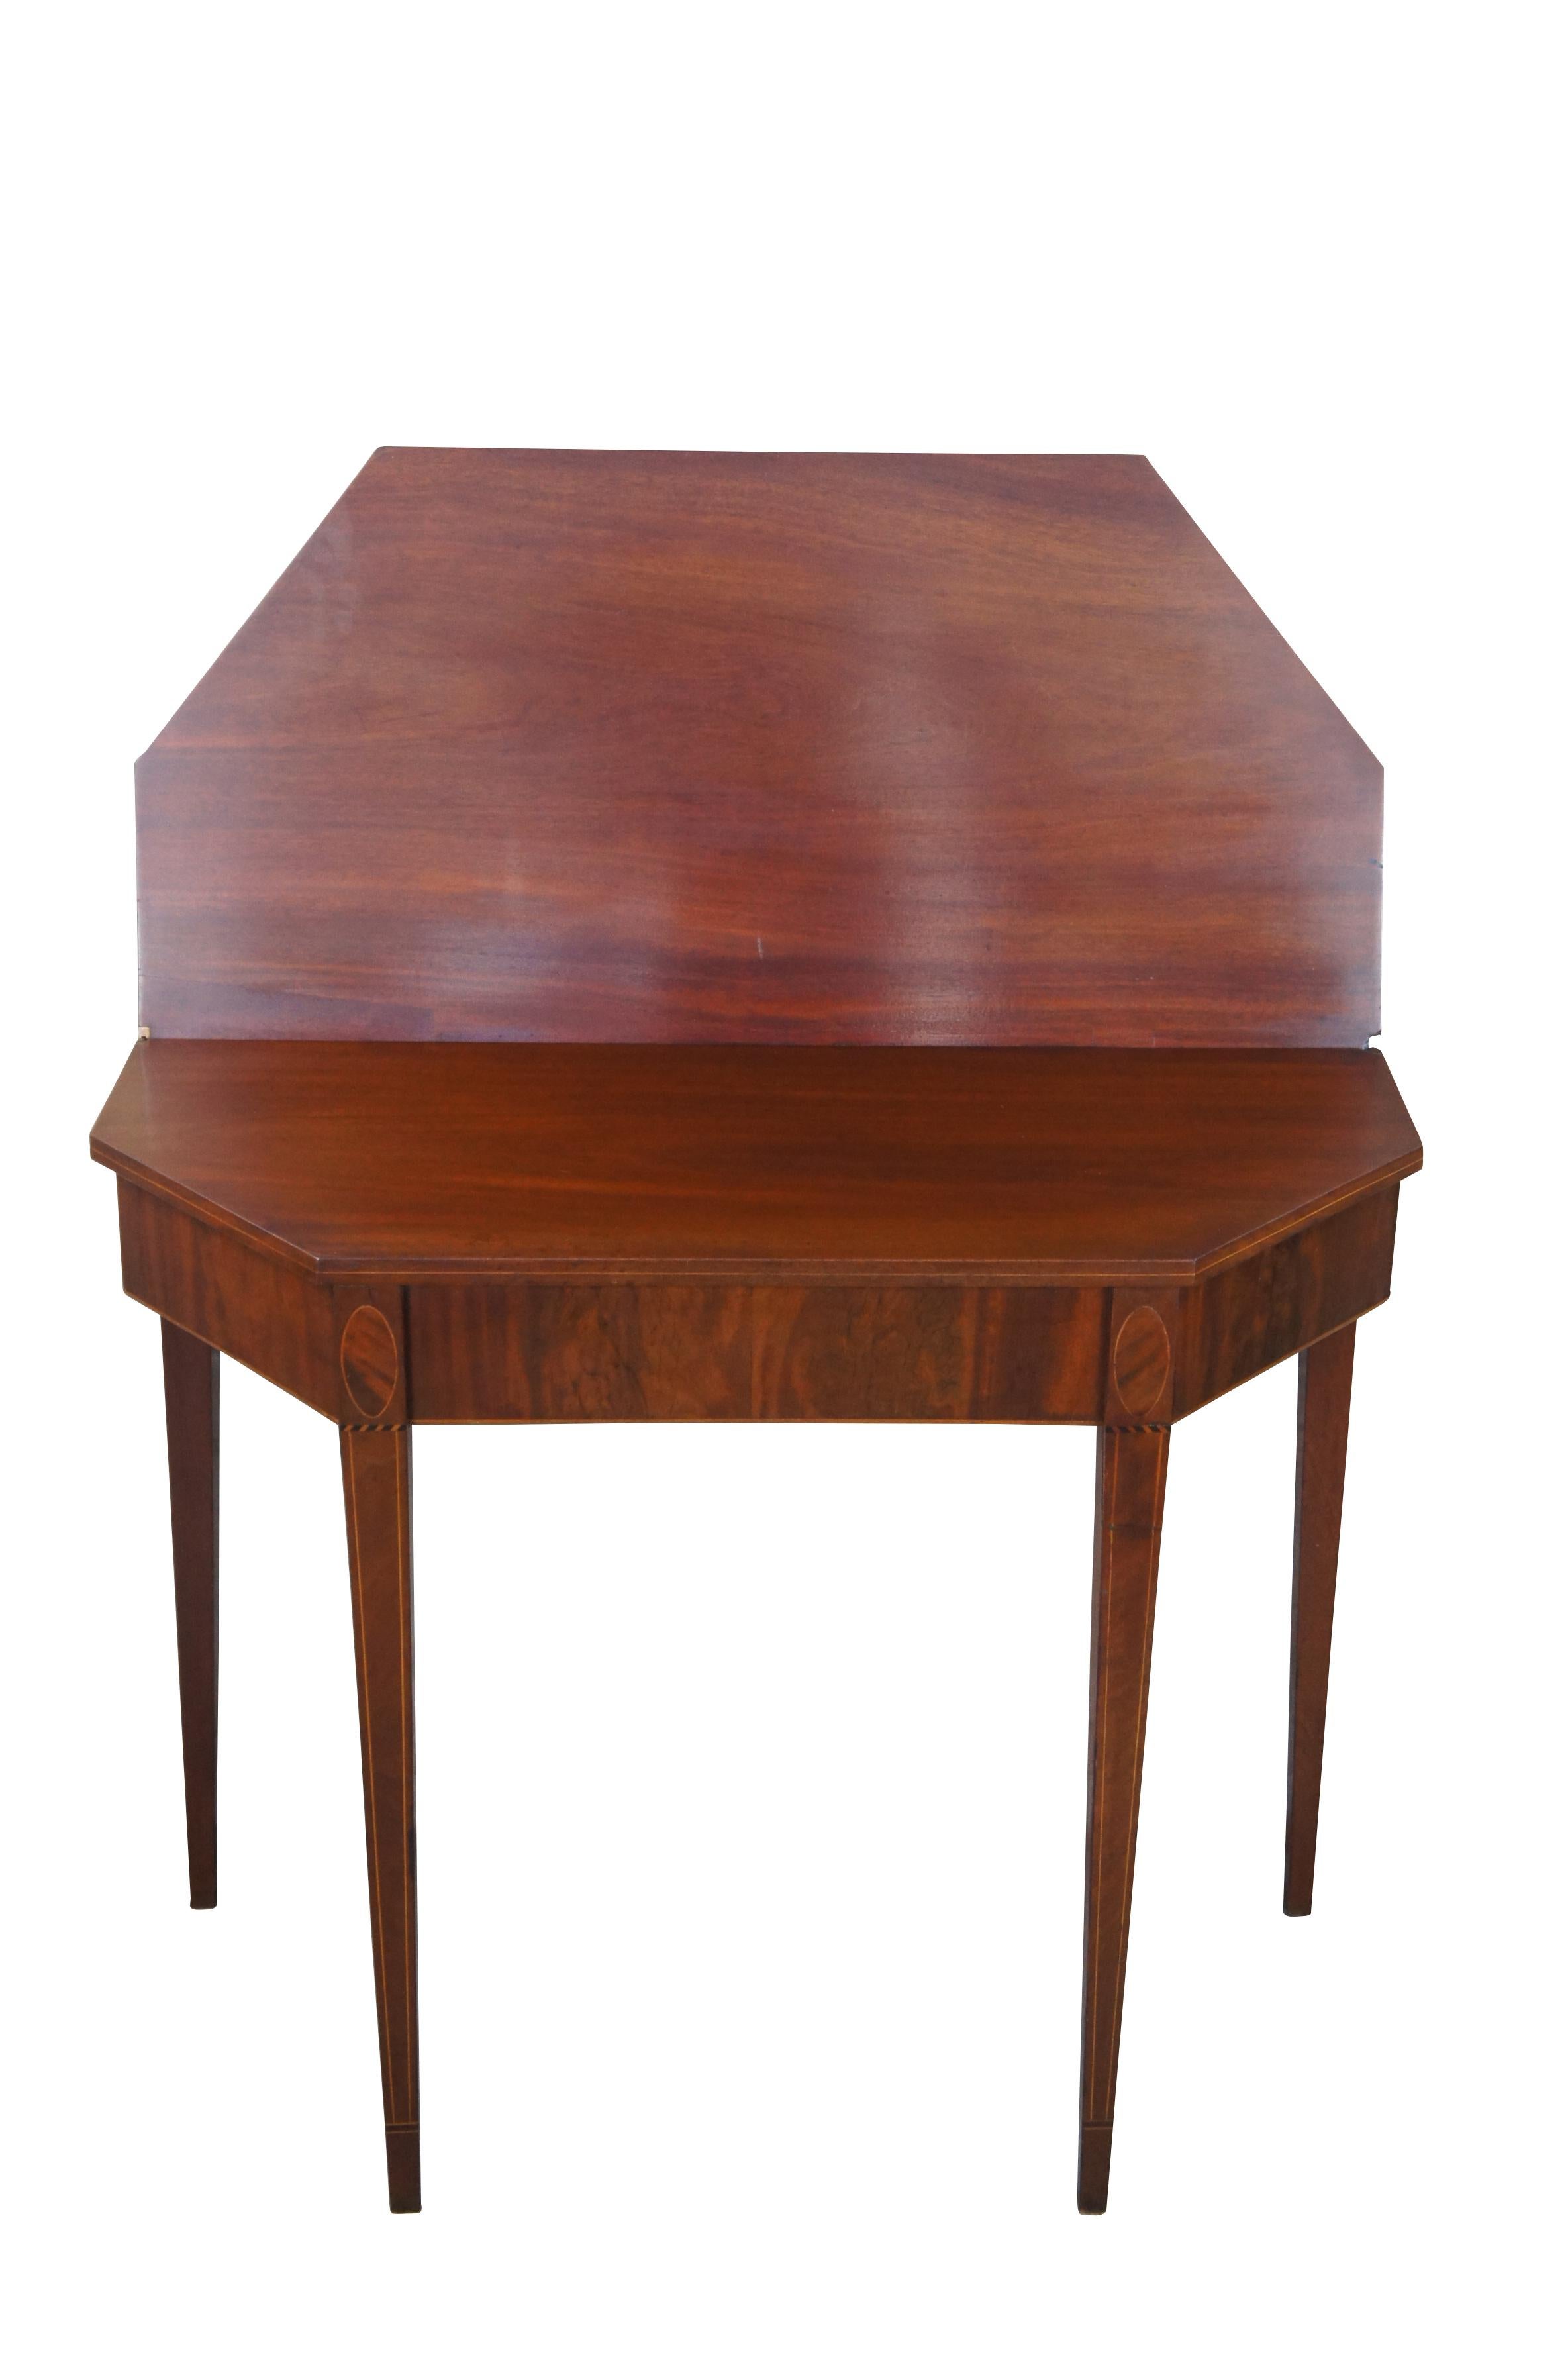 Antique Sheraton Mahogany Inlaid Octagonal Flip Top Game Card Tea Console Table In Good Condition For Sale In Dayton, OH